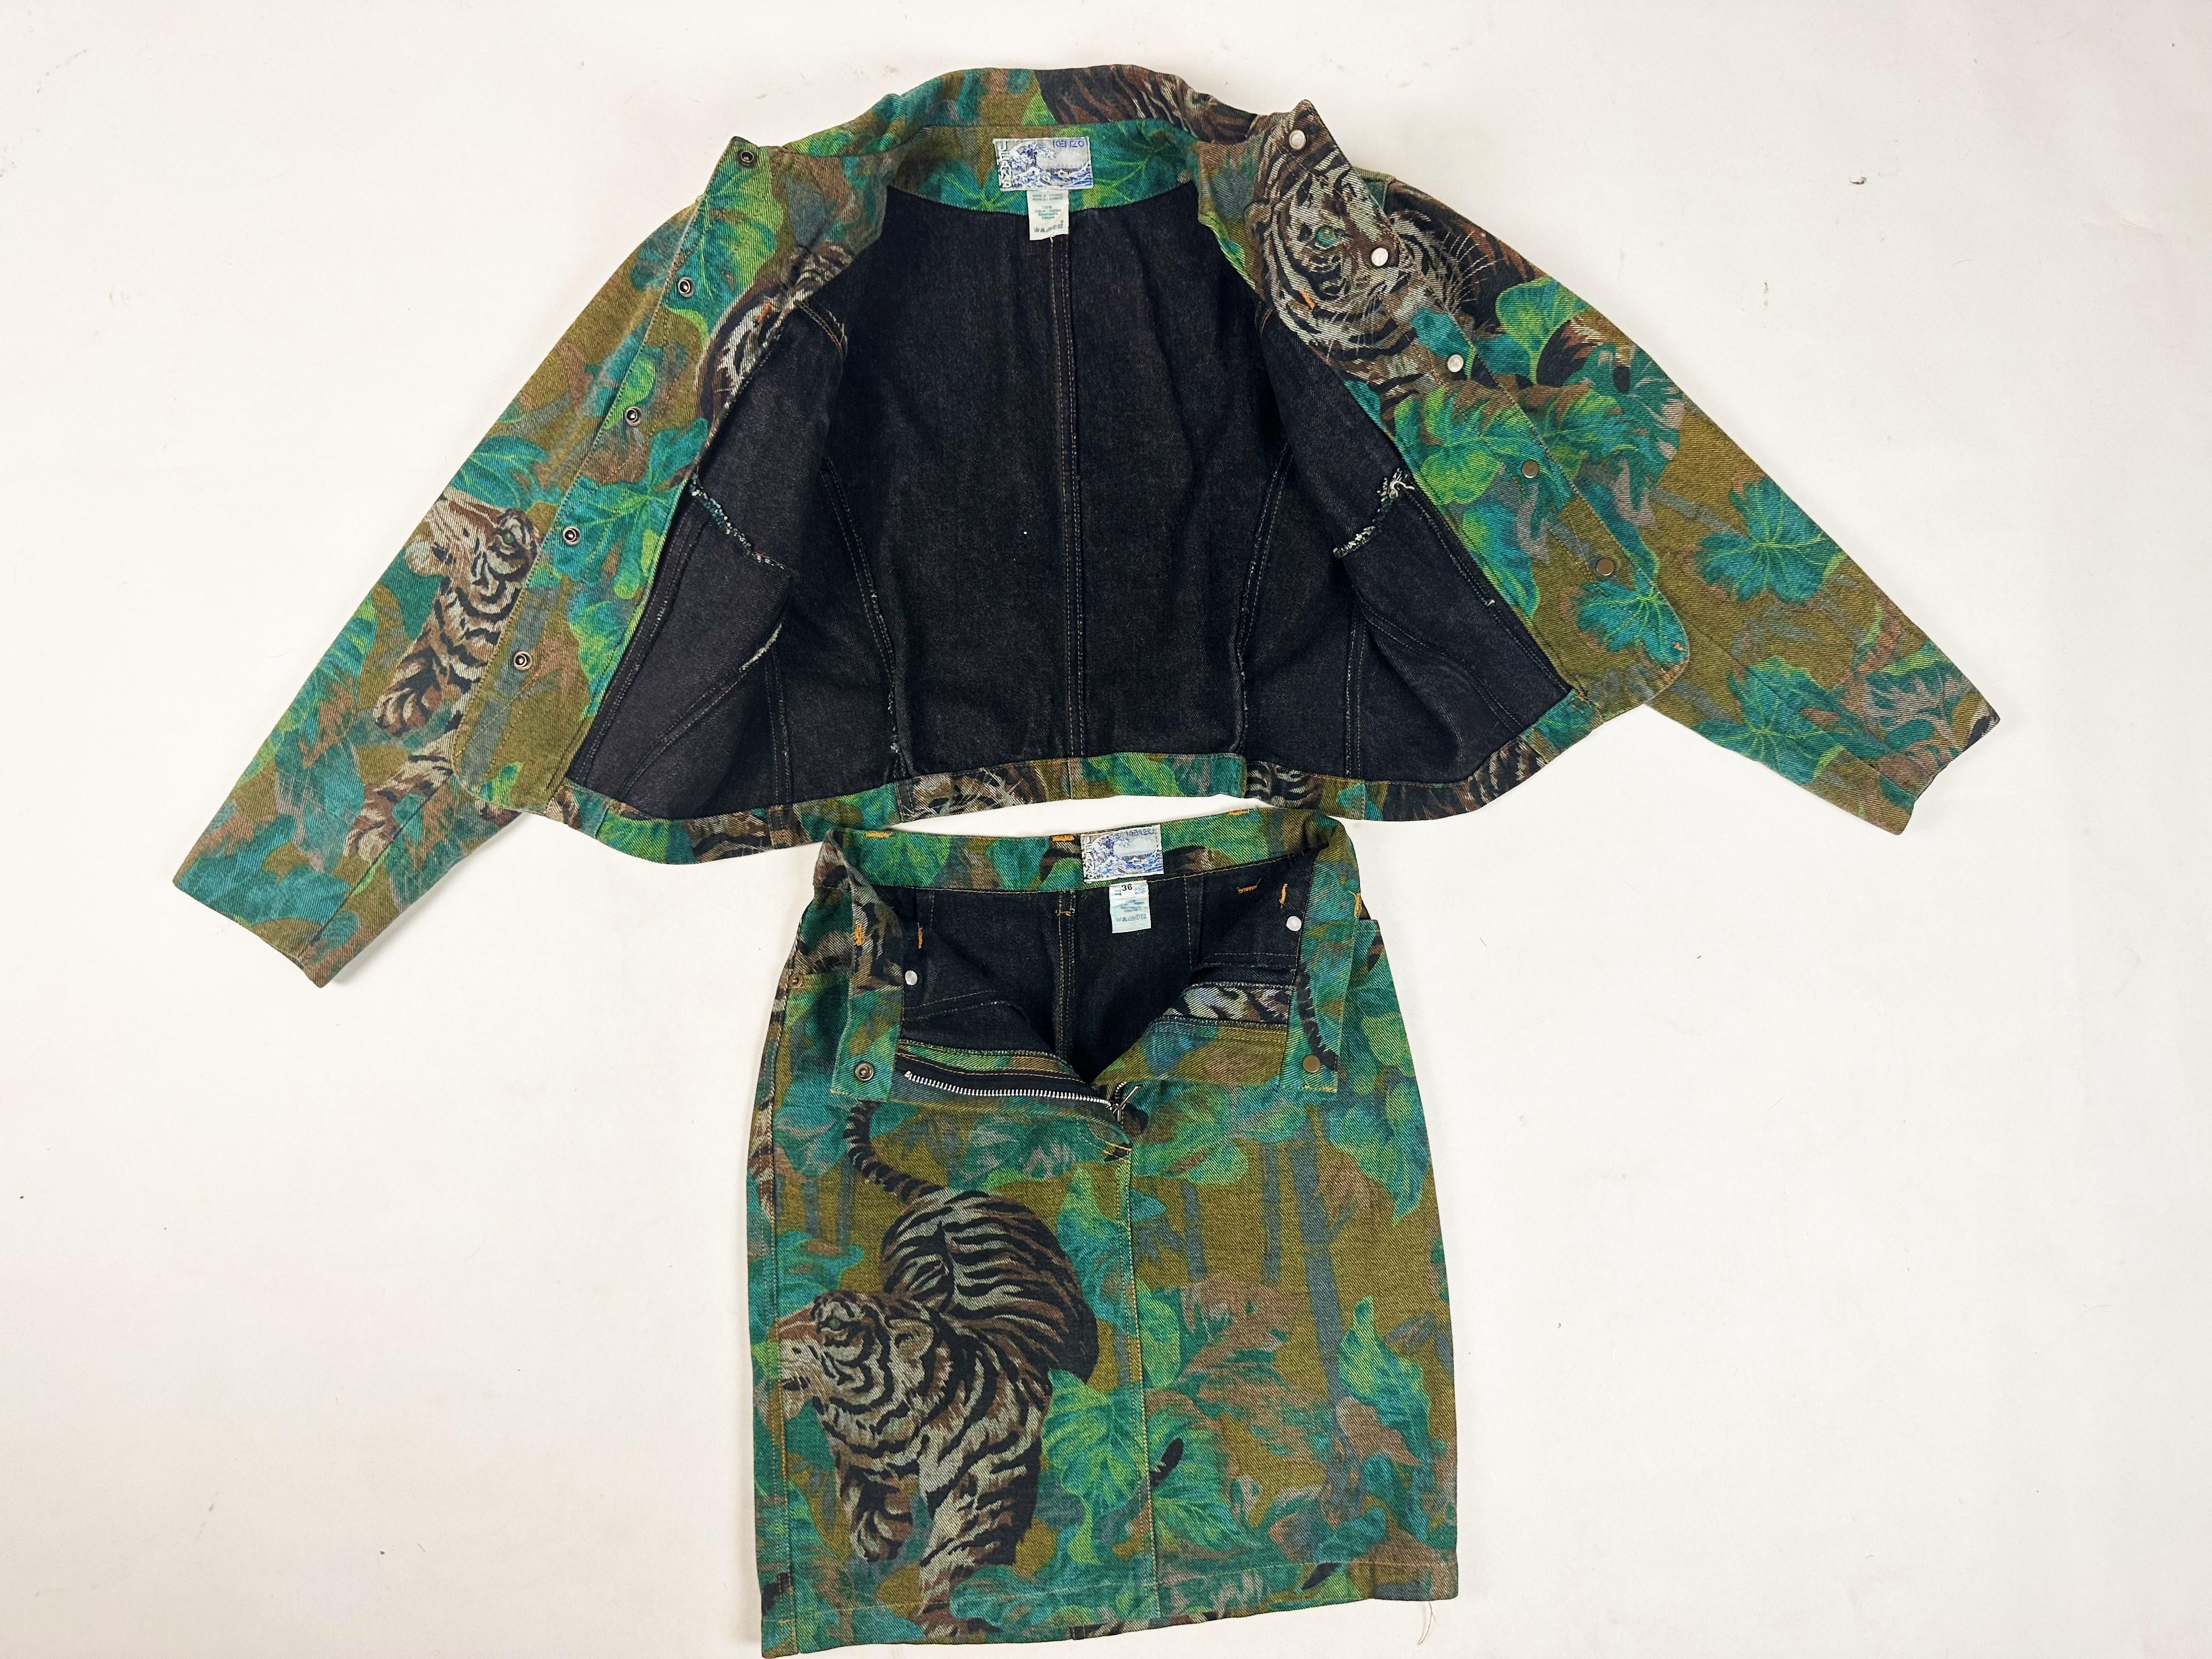 Jacket and Skirt by Kenzo Takada, Jungle & Tiger Print on Denim - French C. 1990 For Sale 11